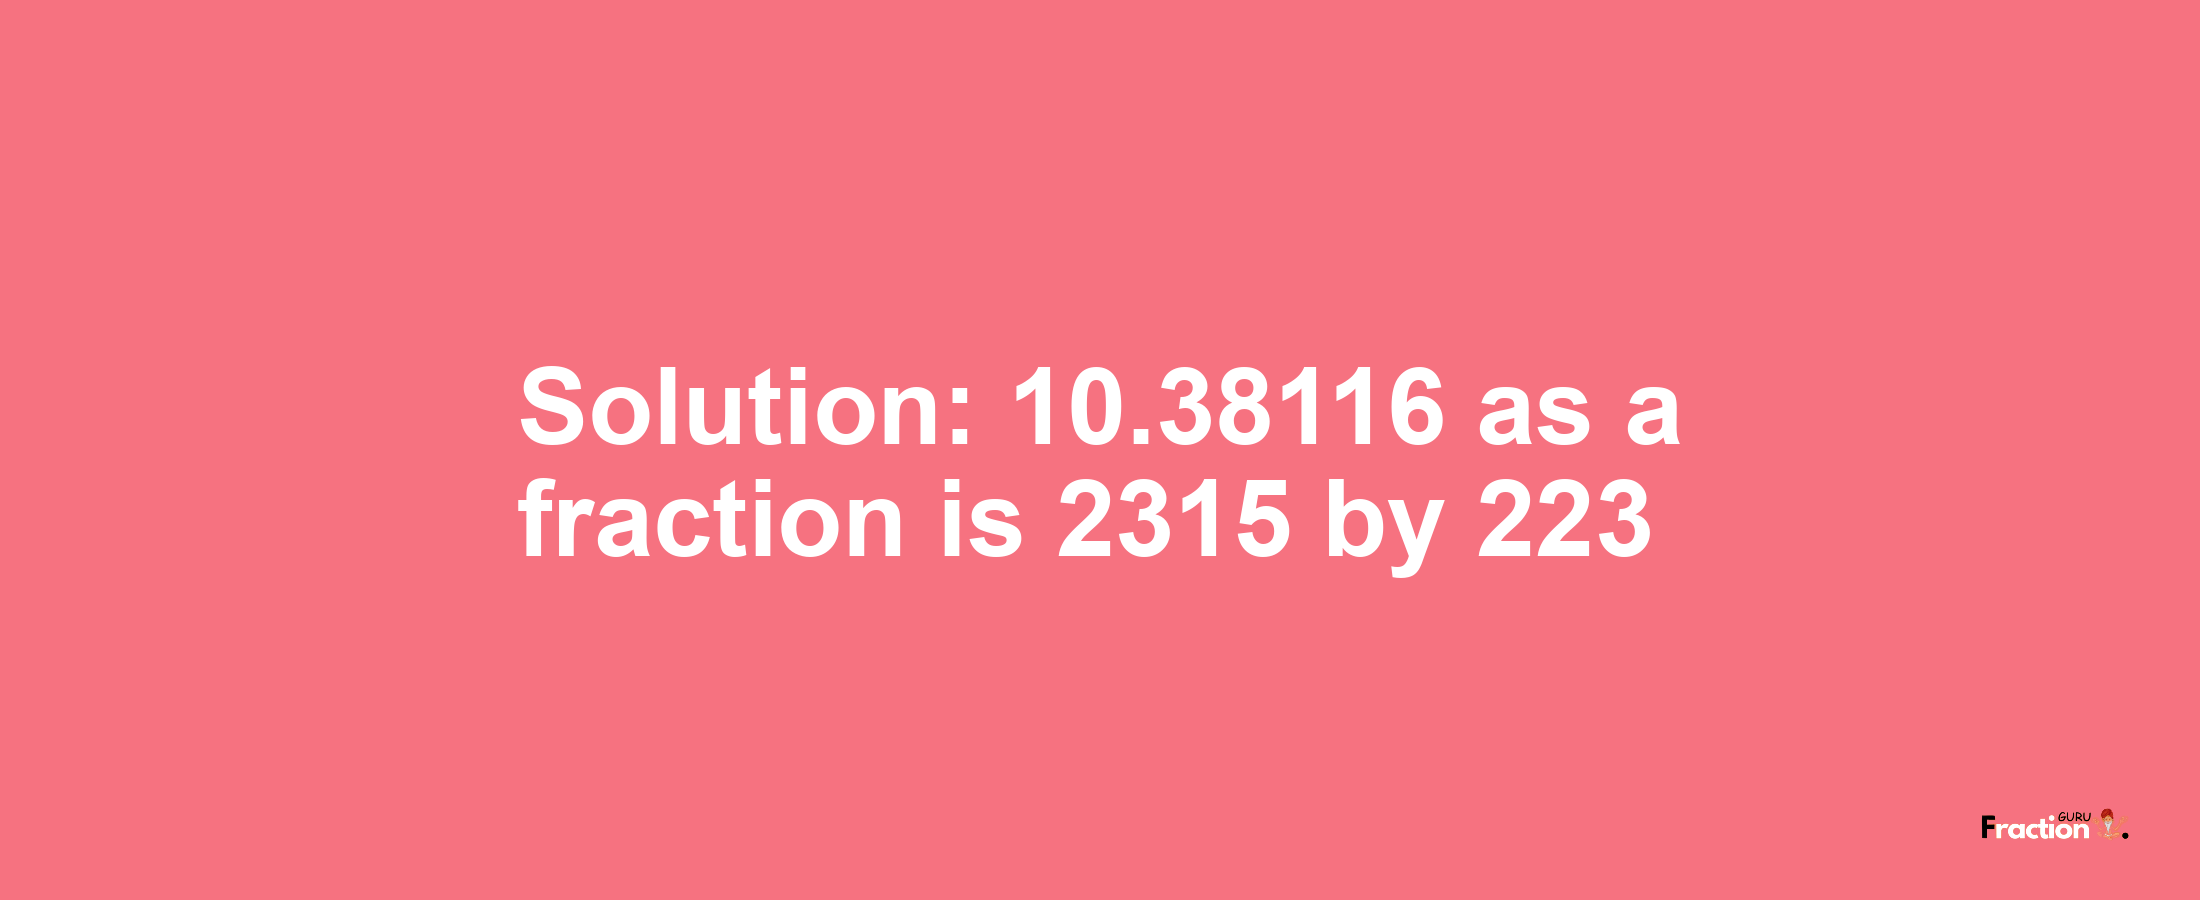 Solution:10.38116 as a fraction is 2315/223